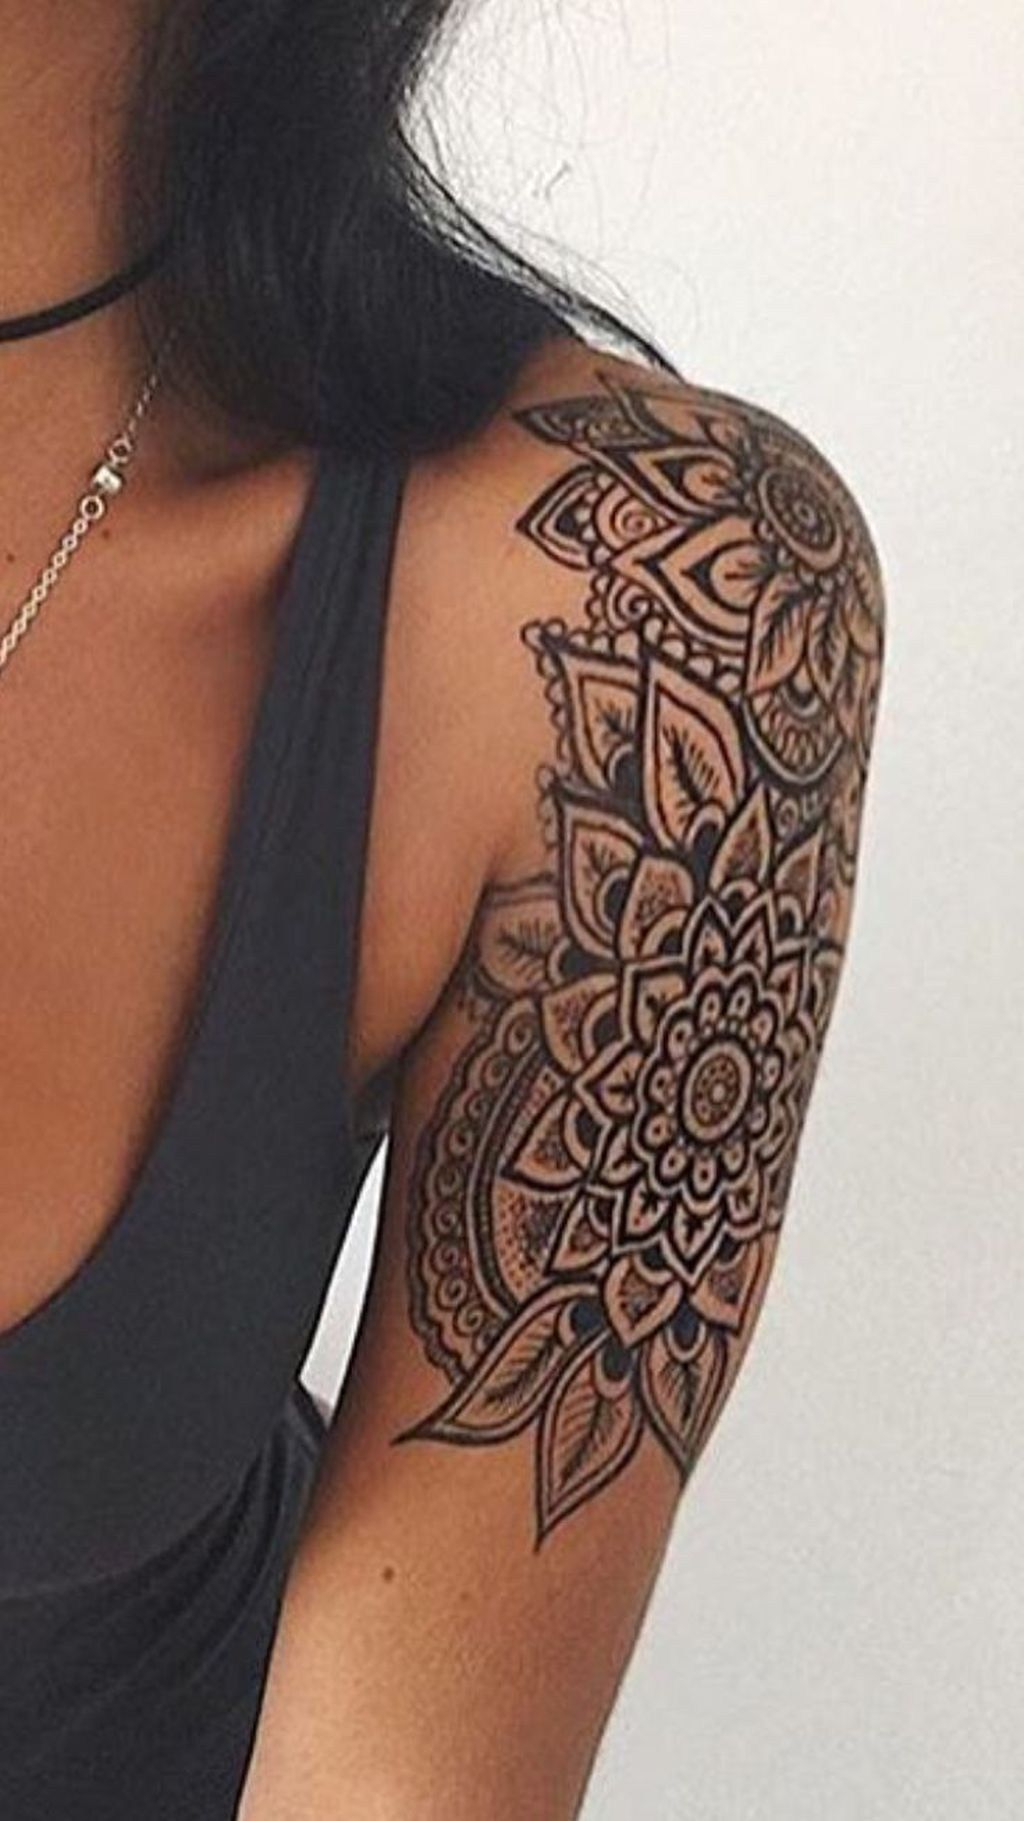 Cute Henna Lace Arm Tattoo Ideas You Should Try 17 Tattooyou pertaining to dimensions 1024 X 1821